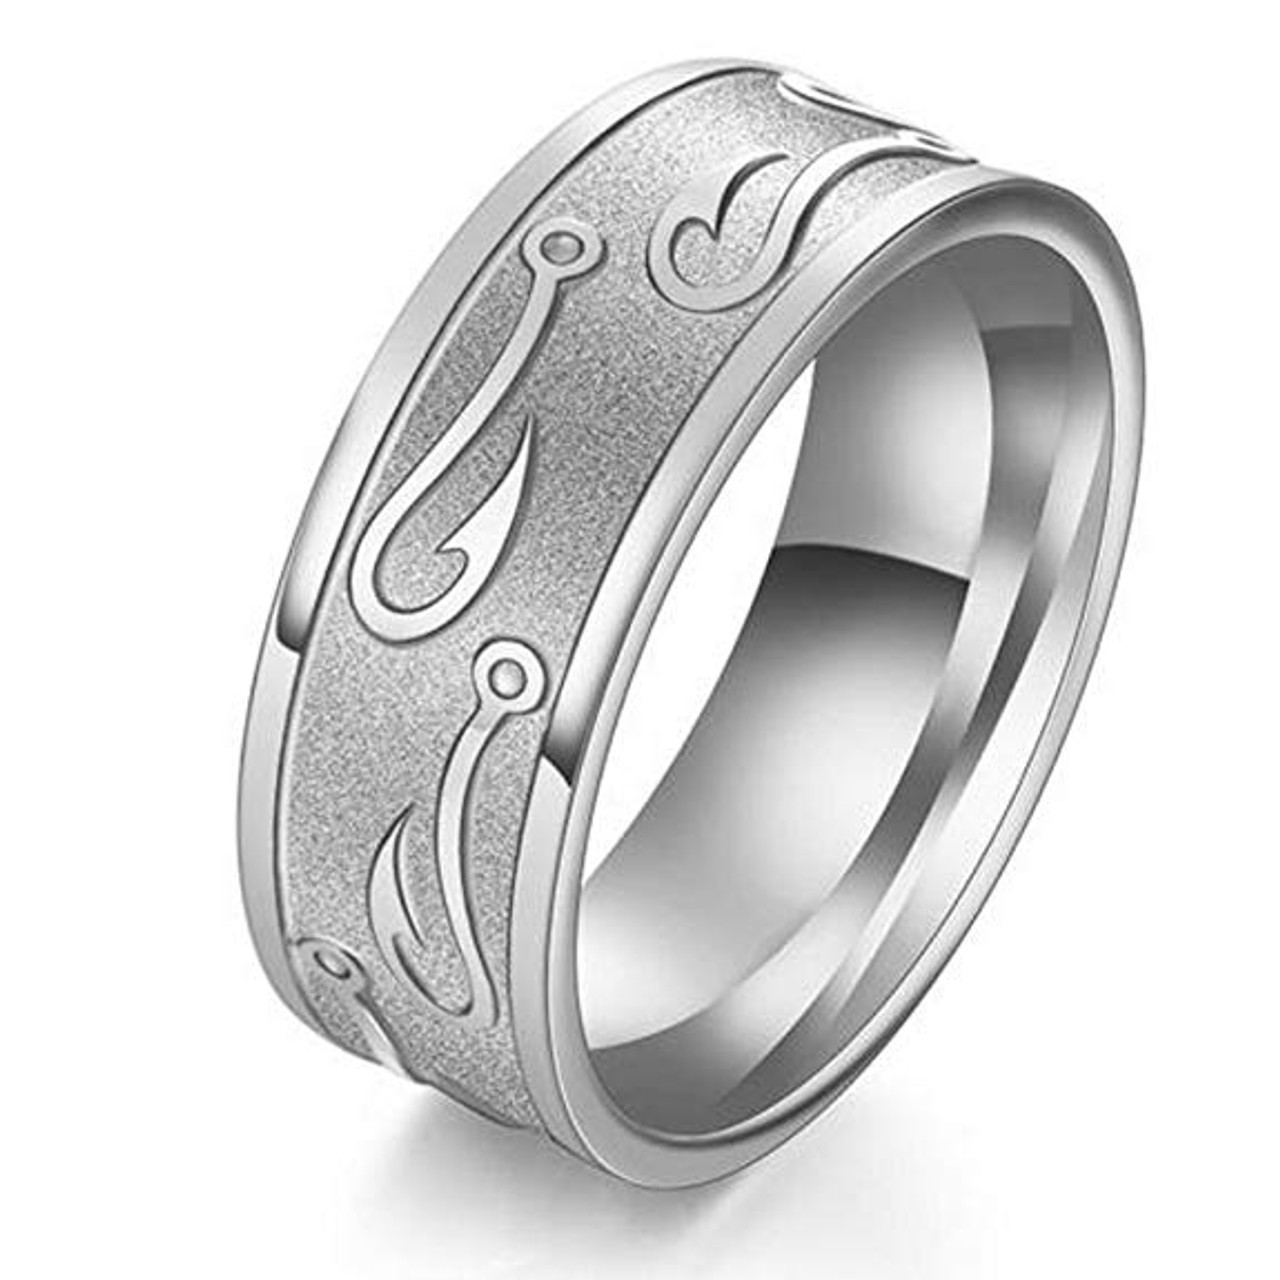 (8mm)  Unisex or Men's Fishing Ring / Fisherman's Wedding ring band. Silver Titanium Band with Embossed Fish Hooks. Wedding ring band Comfort Fit Ring